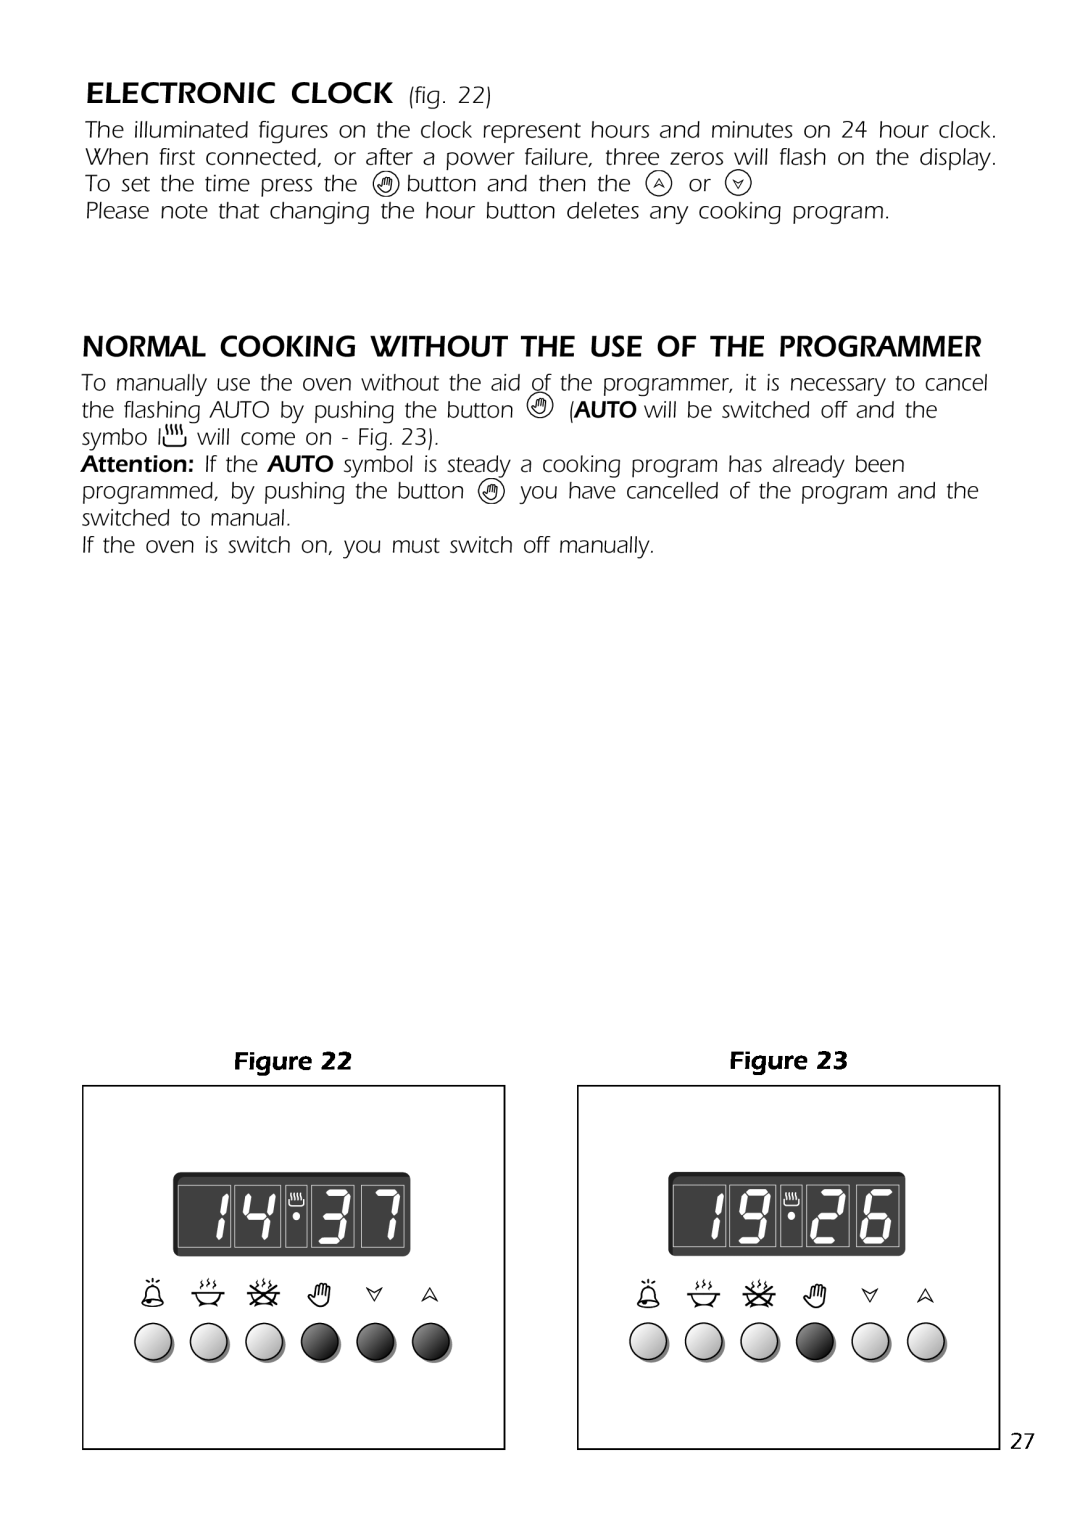 DeLonghi DS 61 GW manual ELECTRONIC CLOCK fig, Normal Cooking Without The Use Of The Programmer 